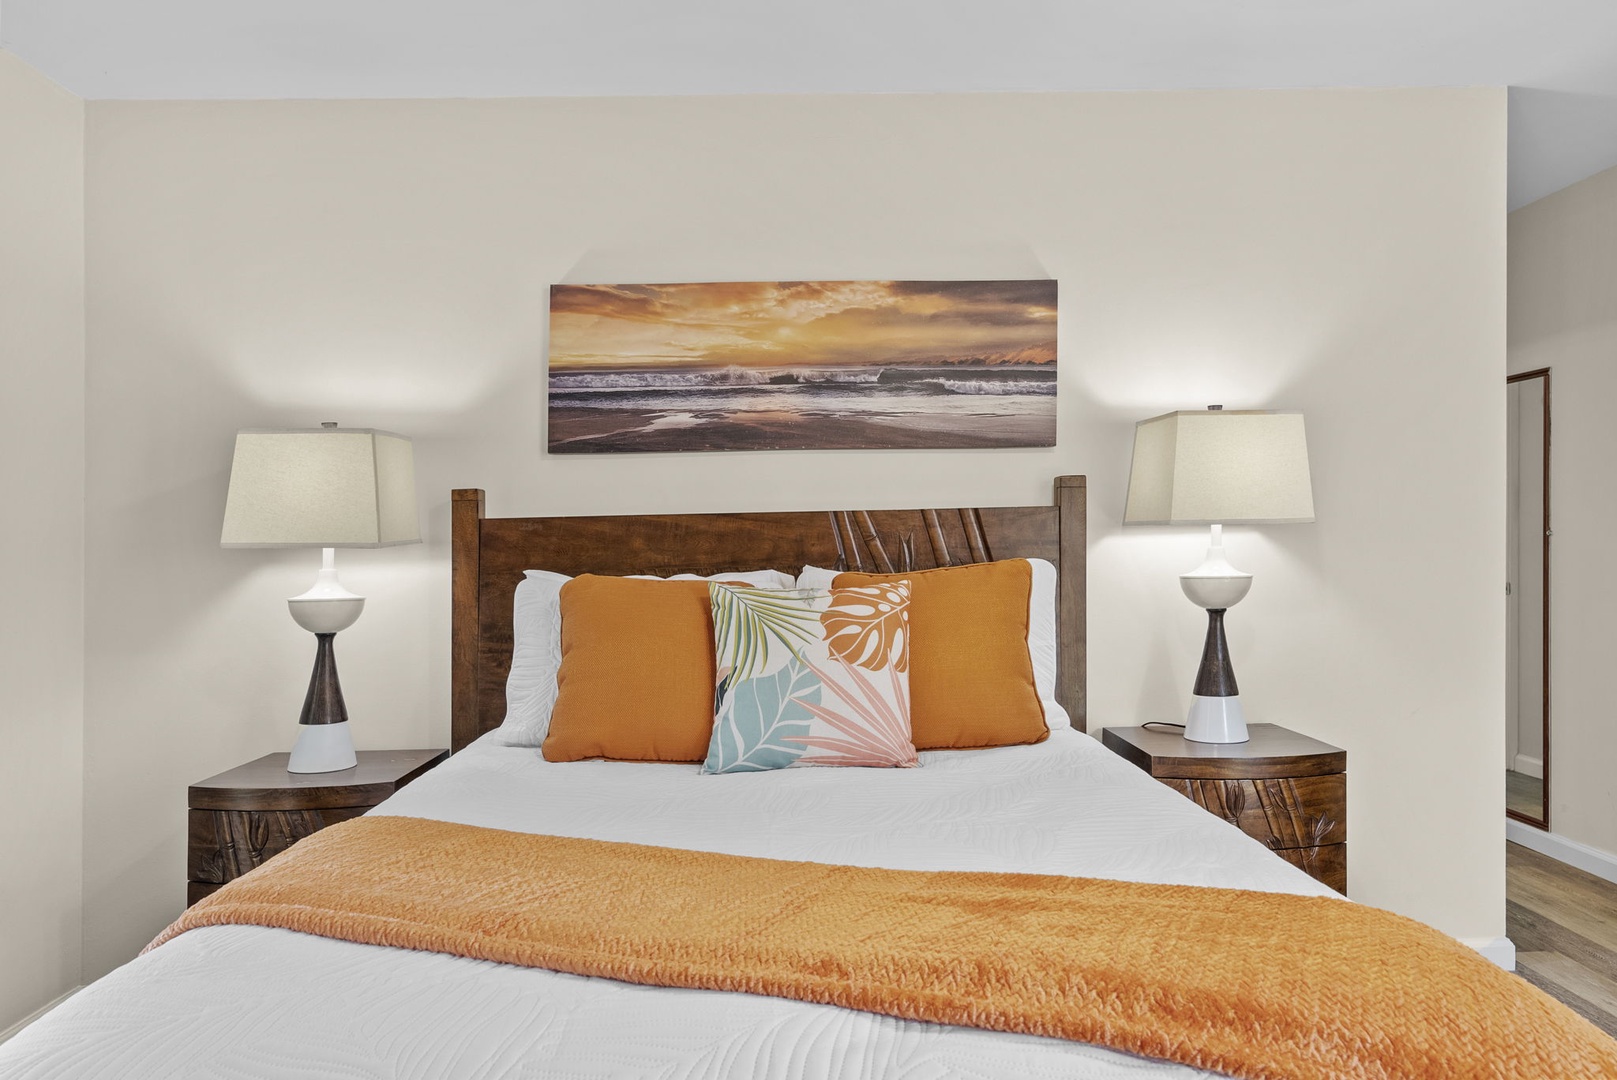 Kailua Vacation Rentals, Hale Aloha - Plush queen bed clothed in fine linens.